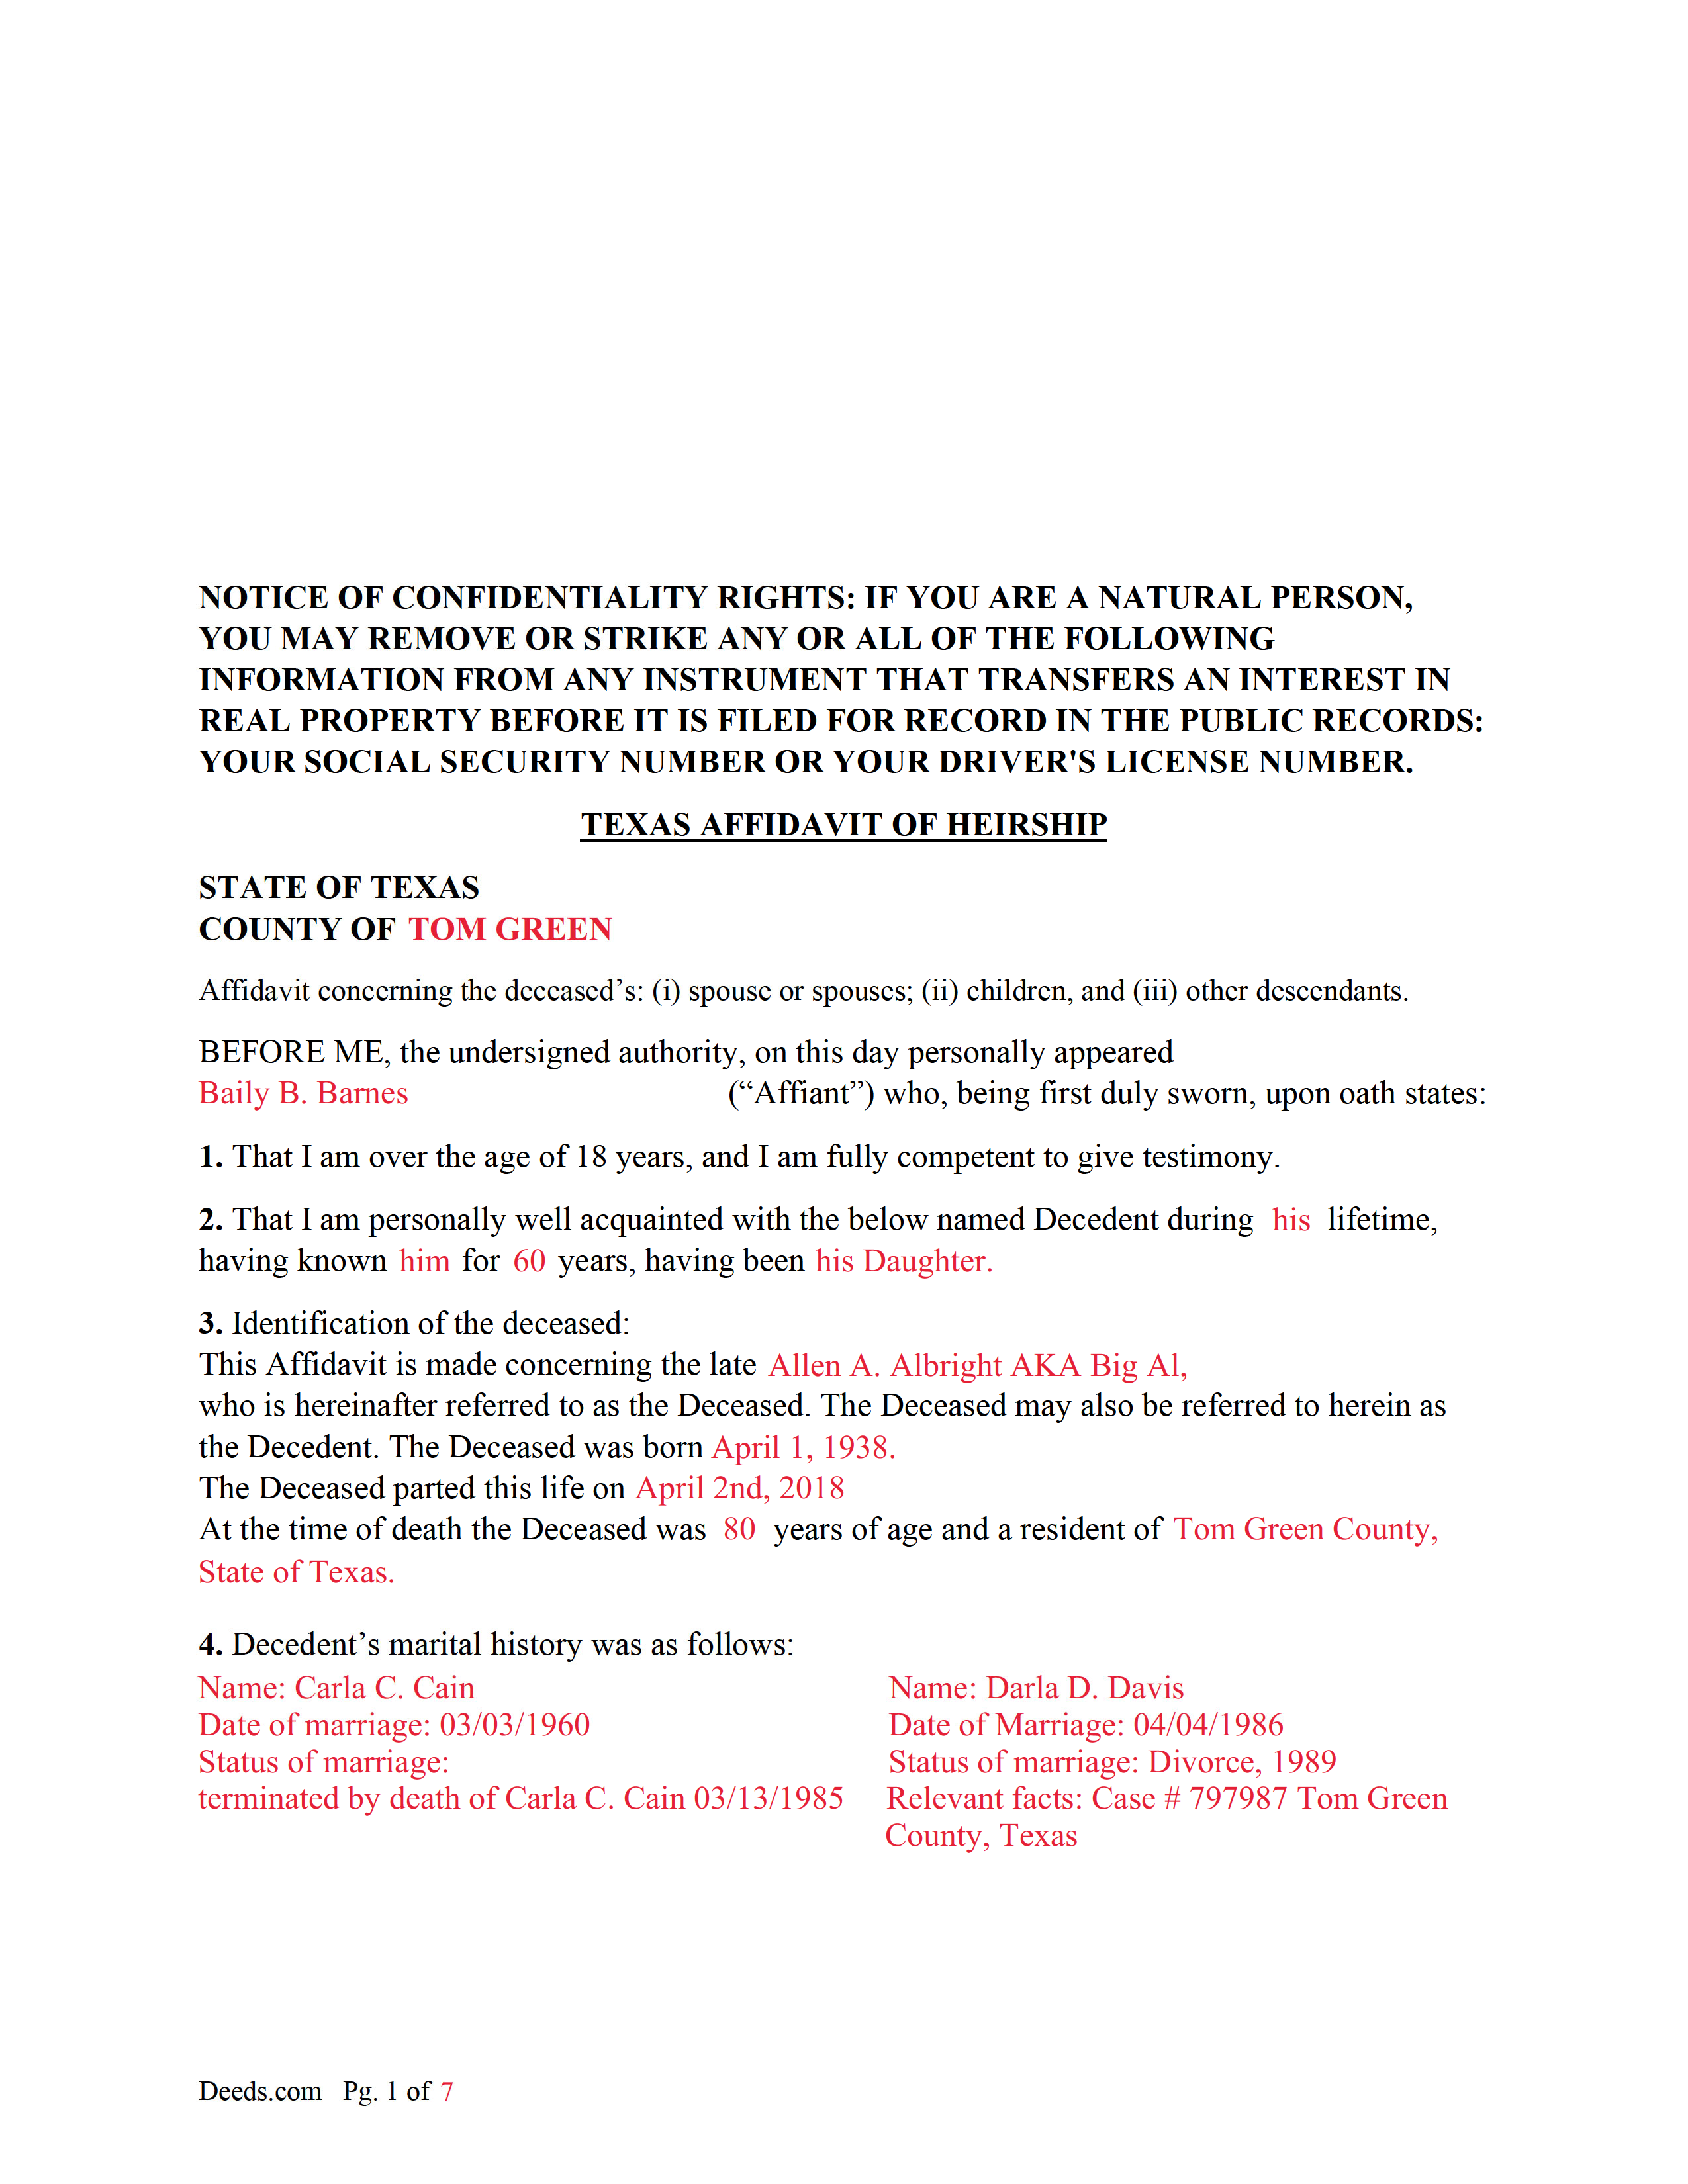 Completed Example of a Texas Affidavit of Heirship Document